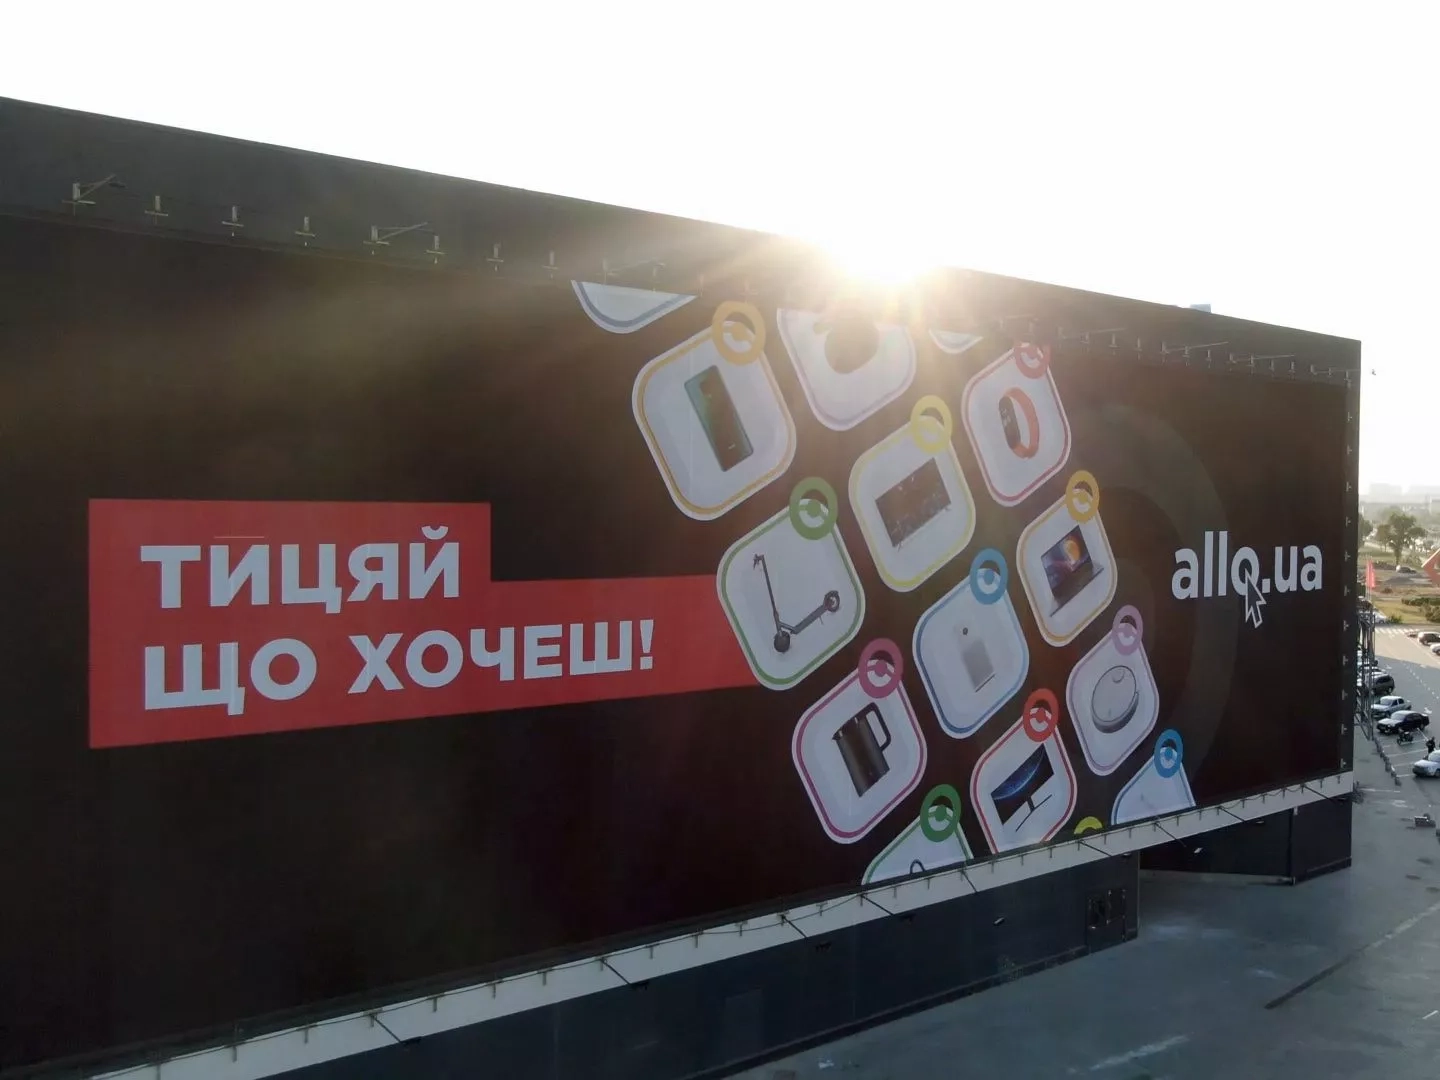 ADVERTISING CAN NEVER BE TOO MUCH. BANNER ON "BLOCKBUSTER" SHOPPING MALL FOR ALLO